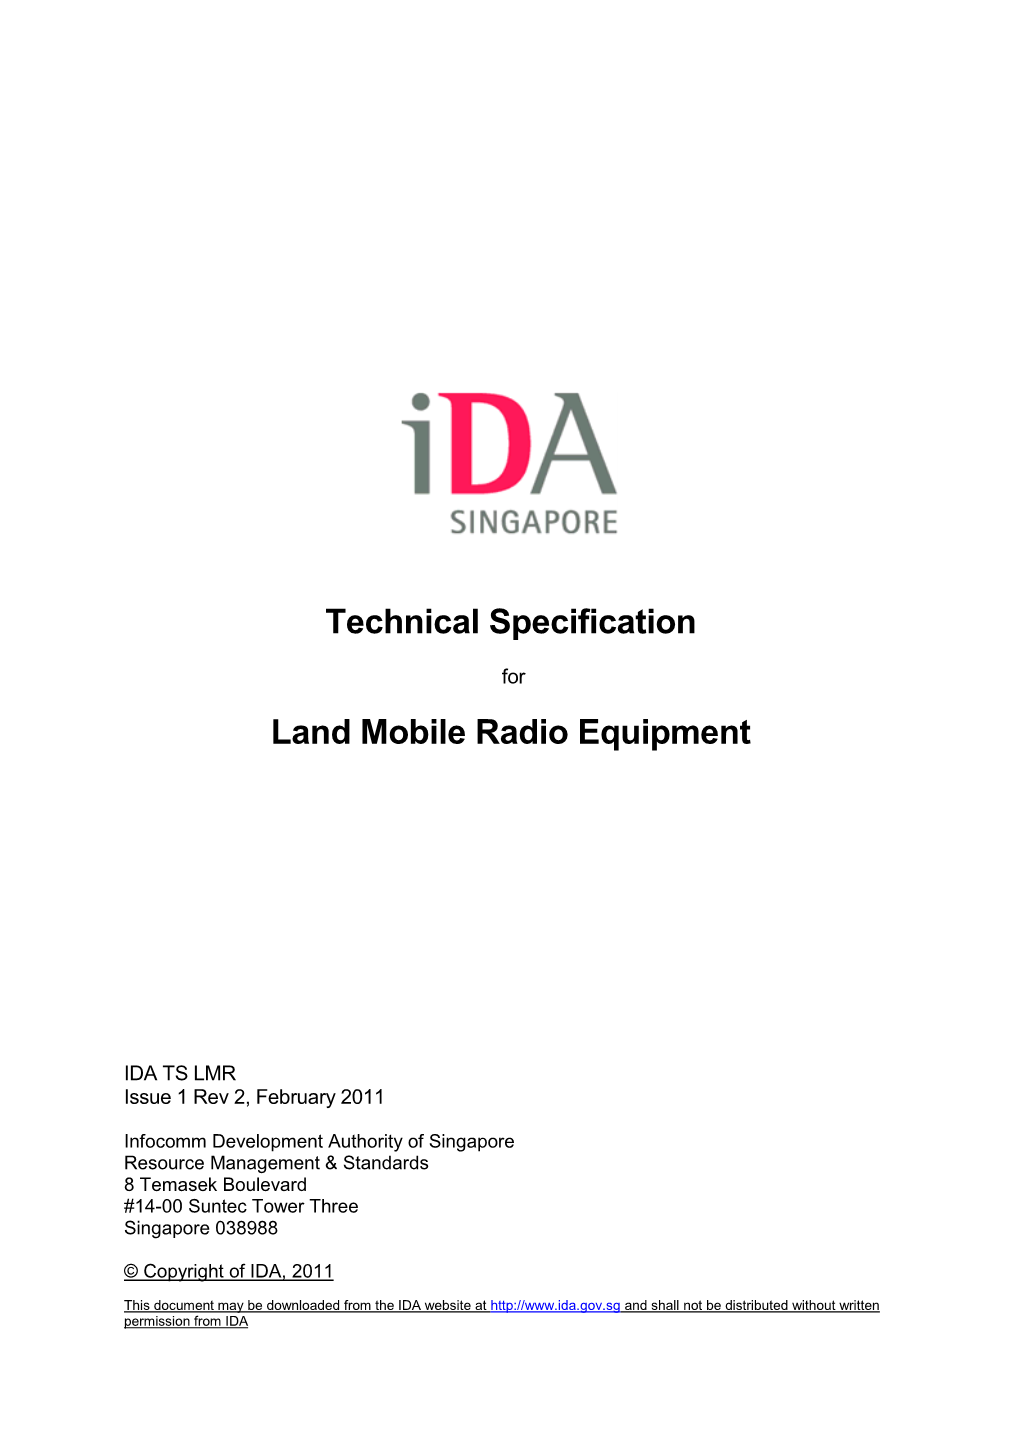 Technical Specification Land Mobile Radio Equipment